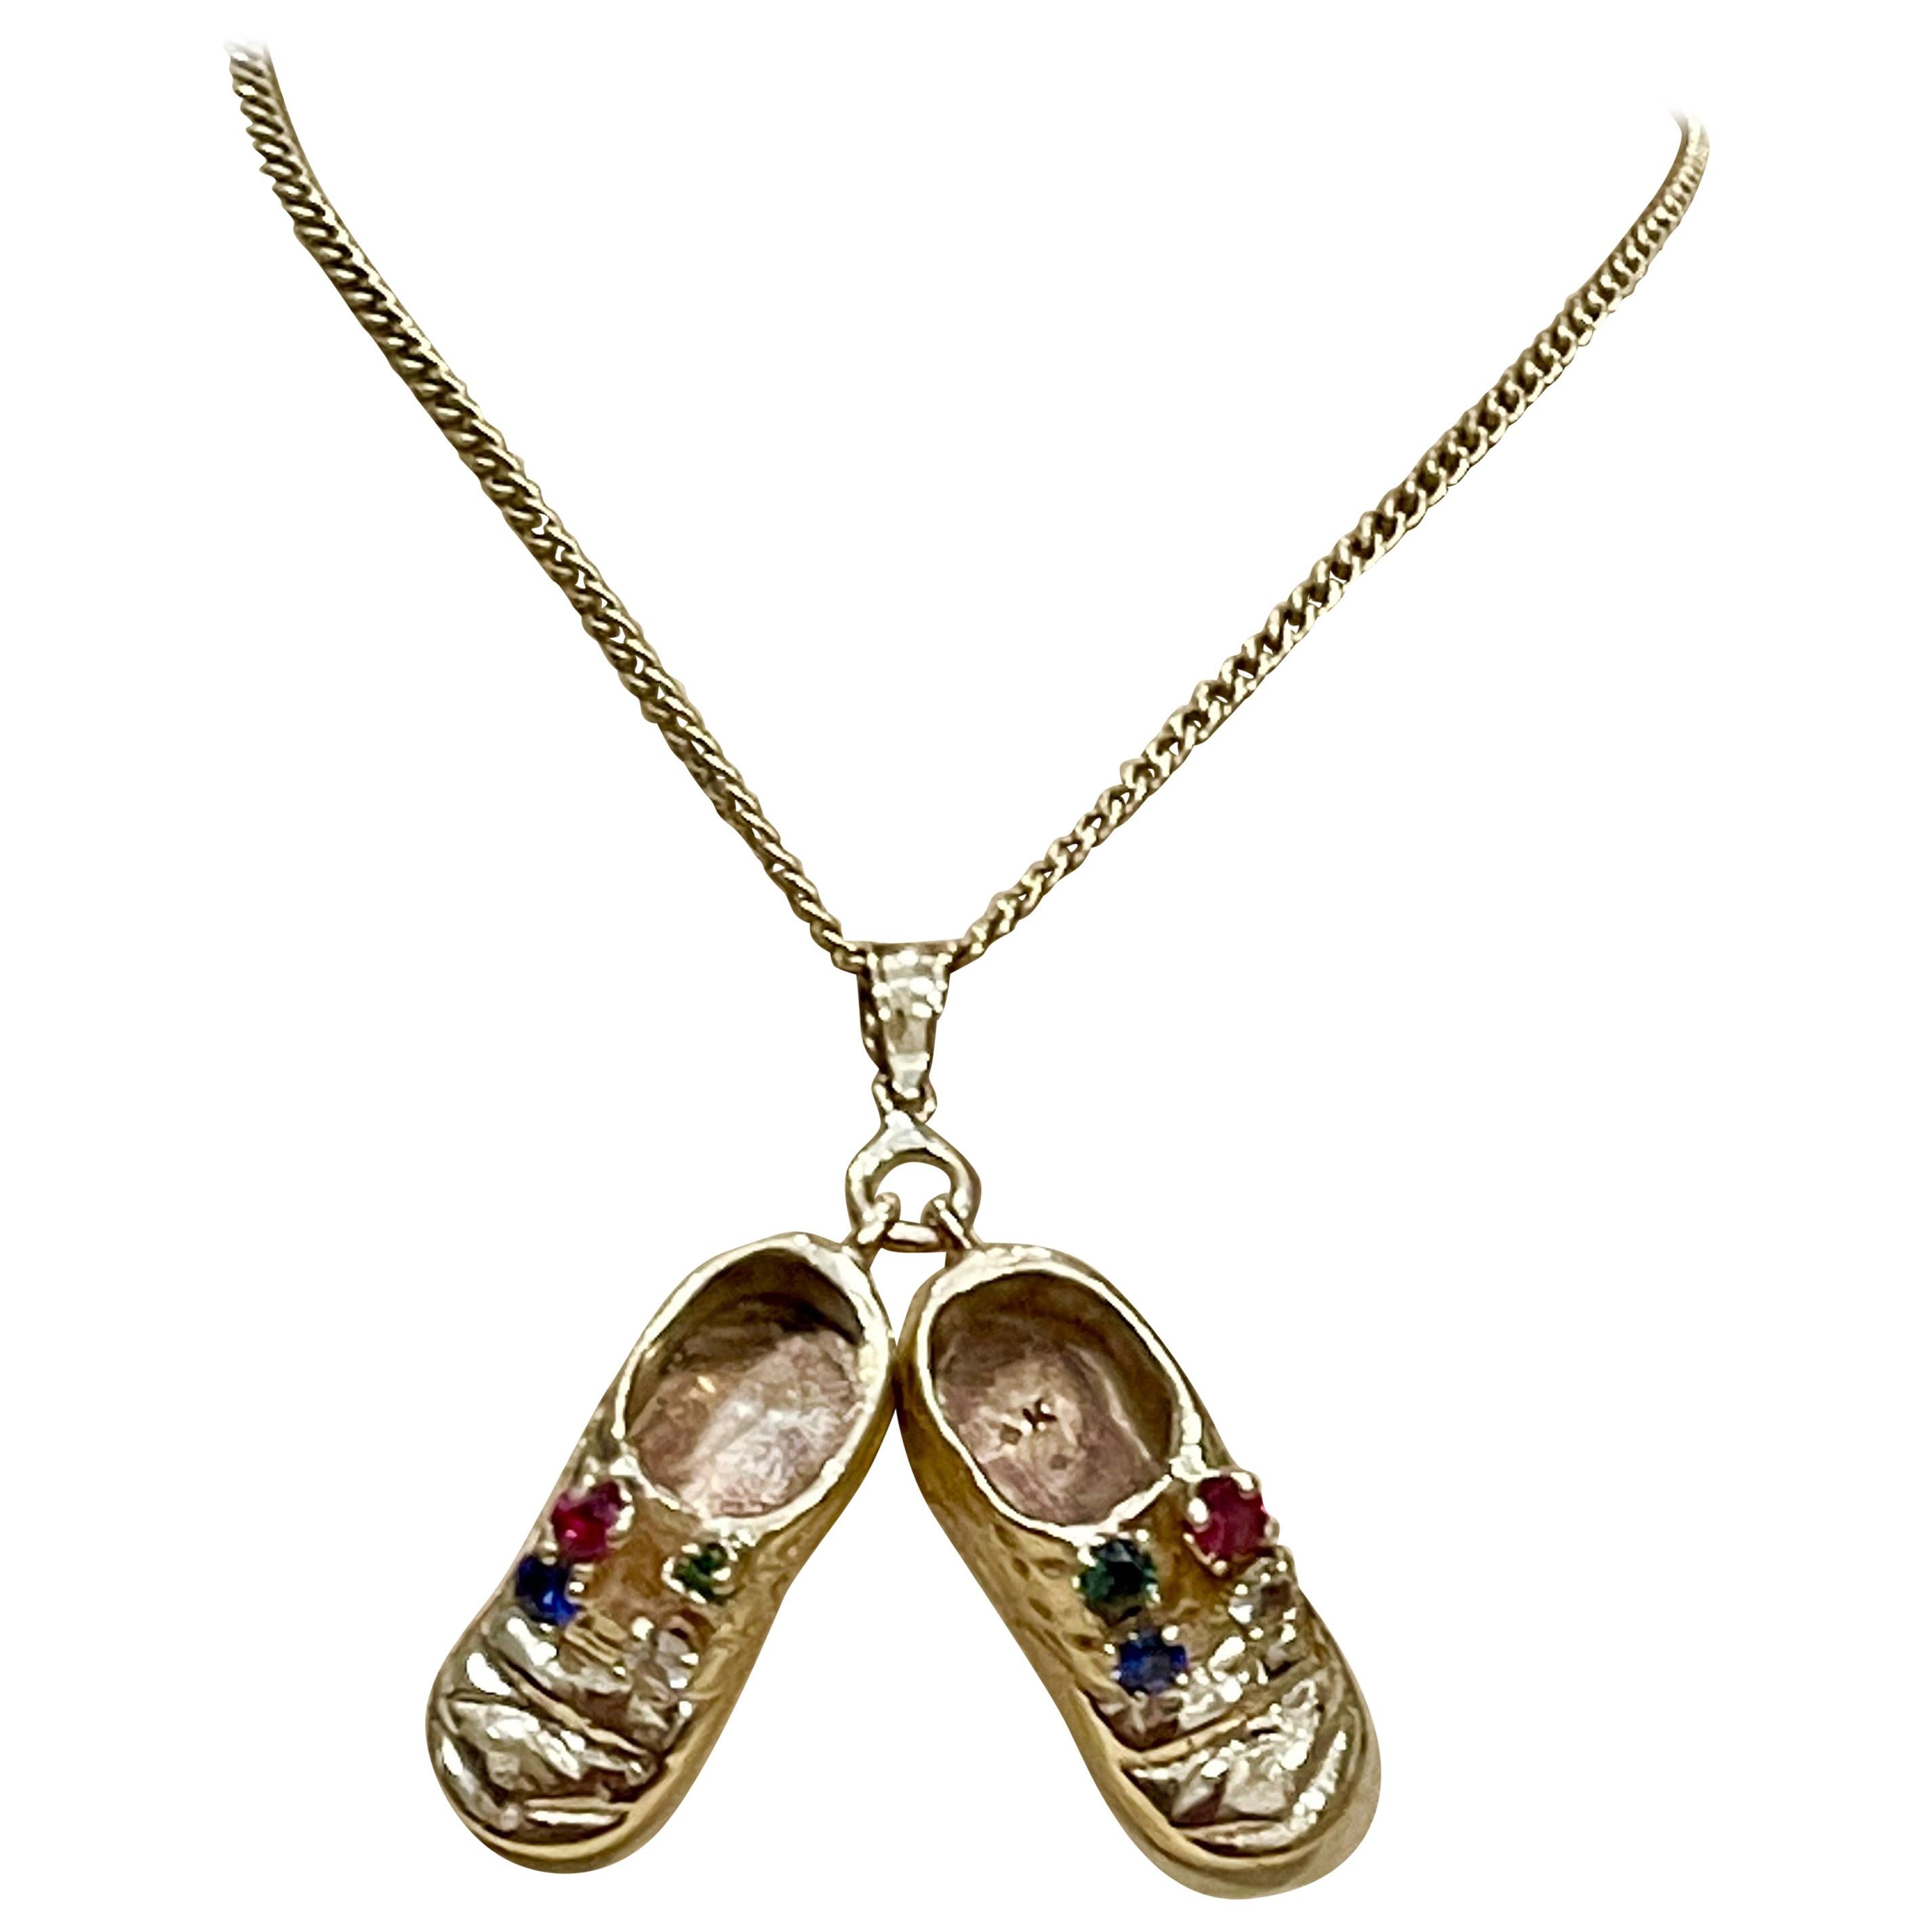 Pair of Shoe Charms with Precious Stone Pendant Necklace and Yellow Gold Chain